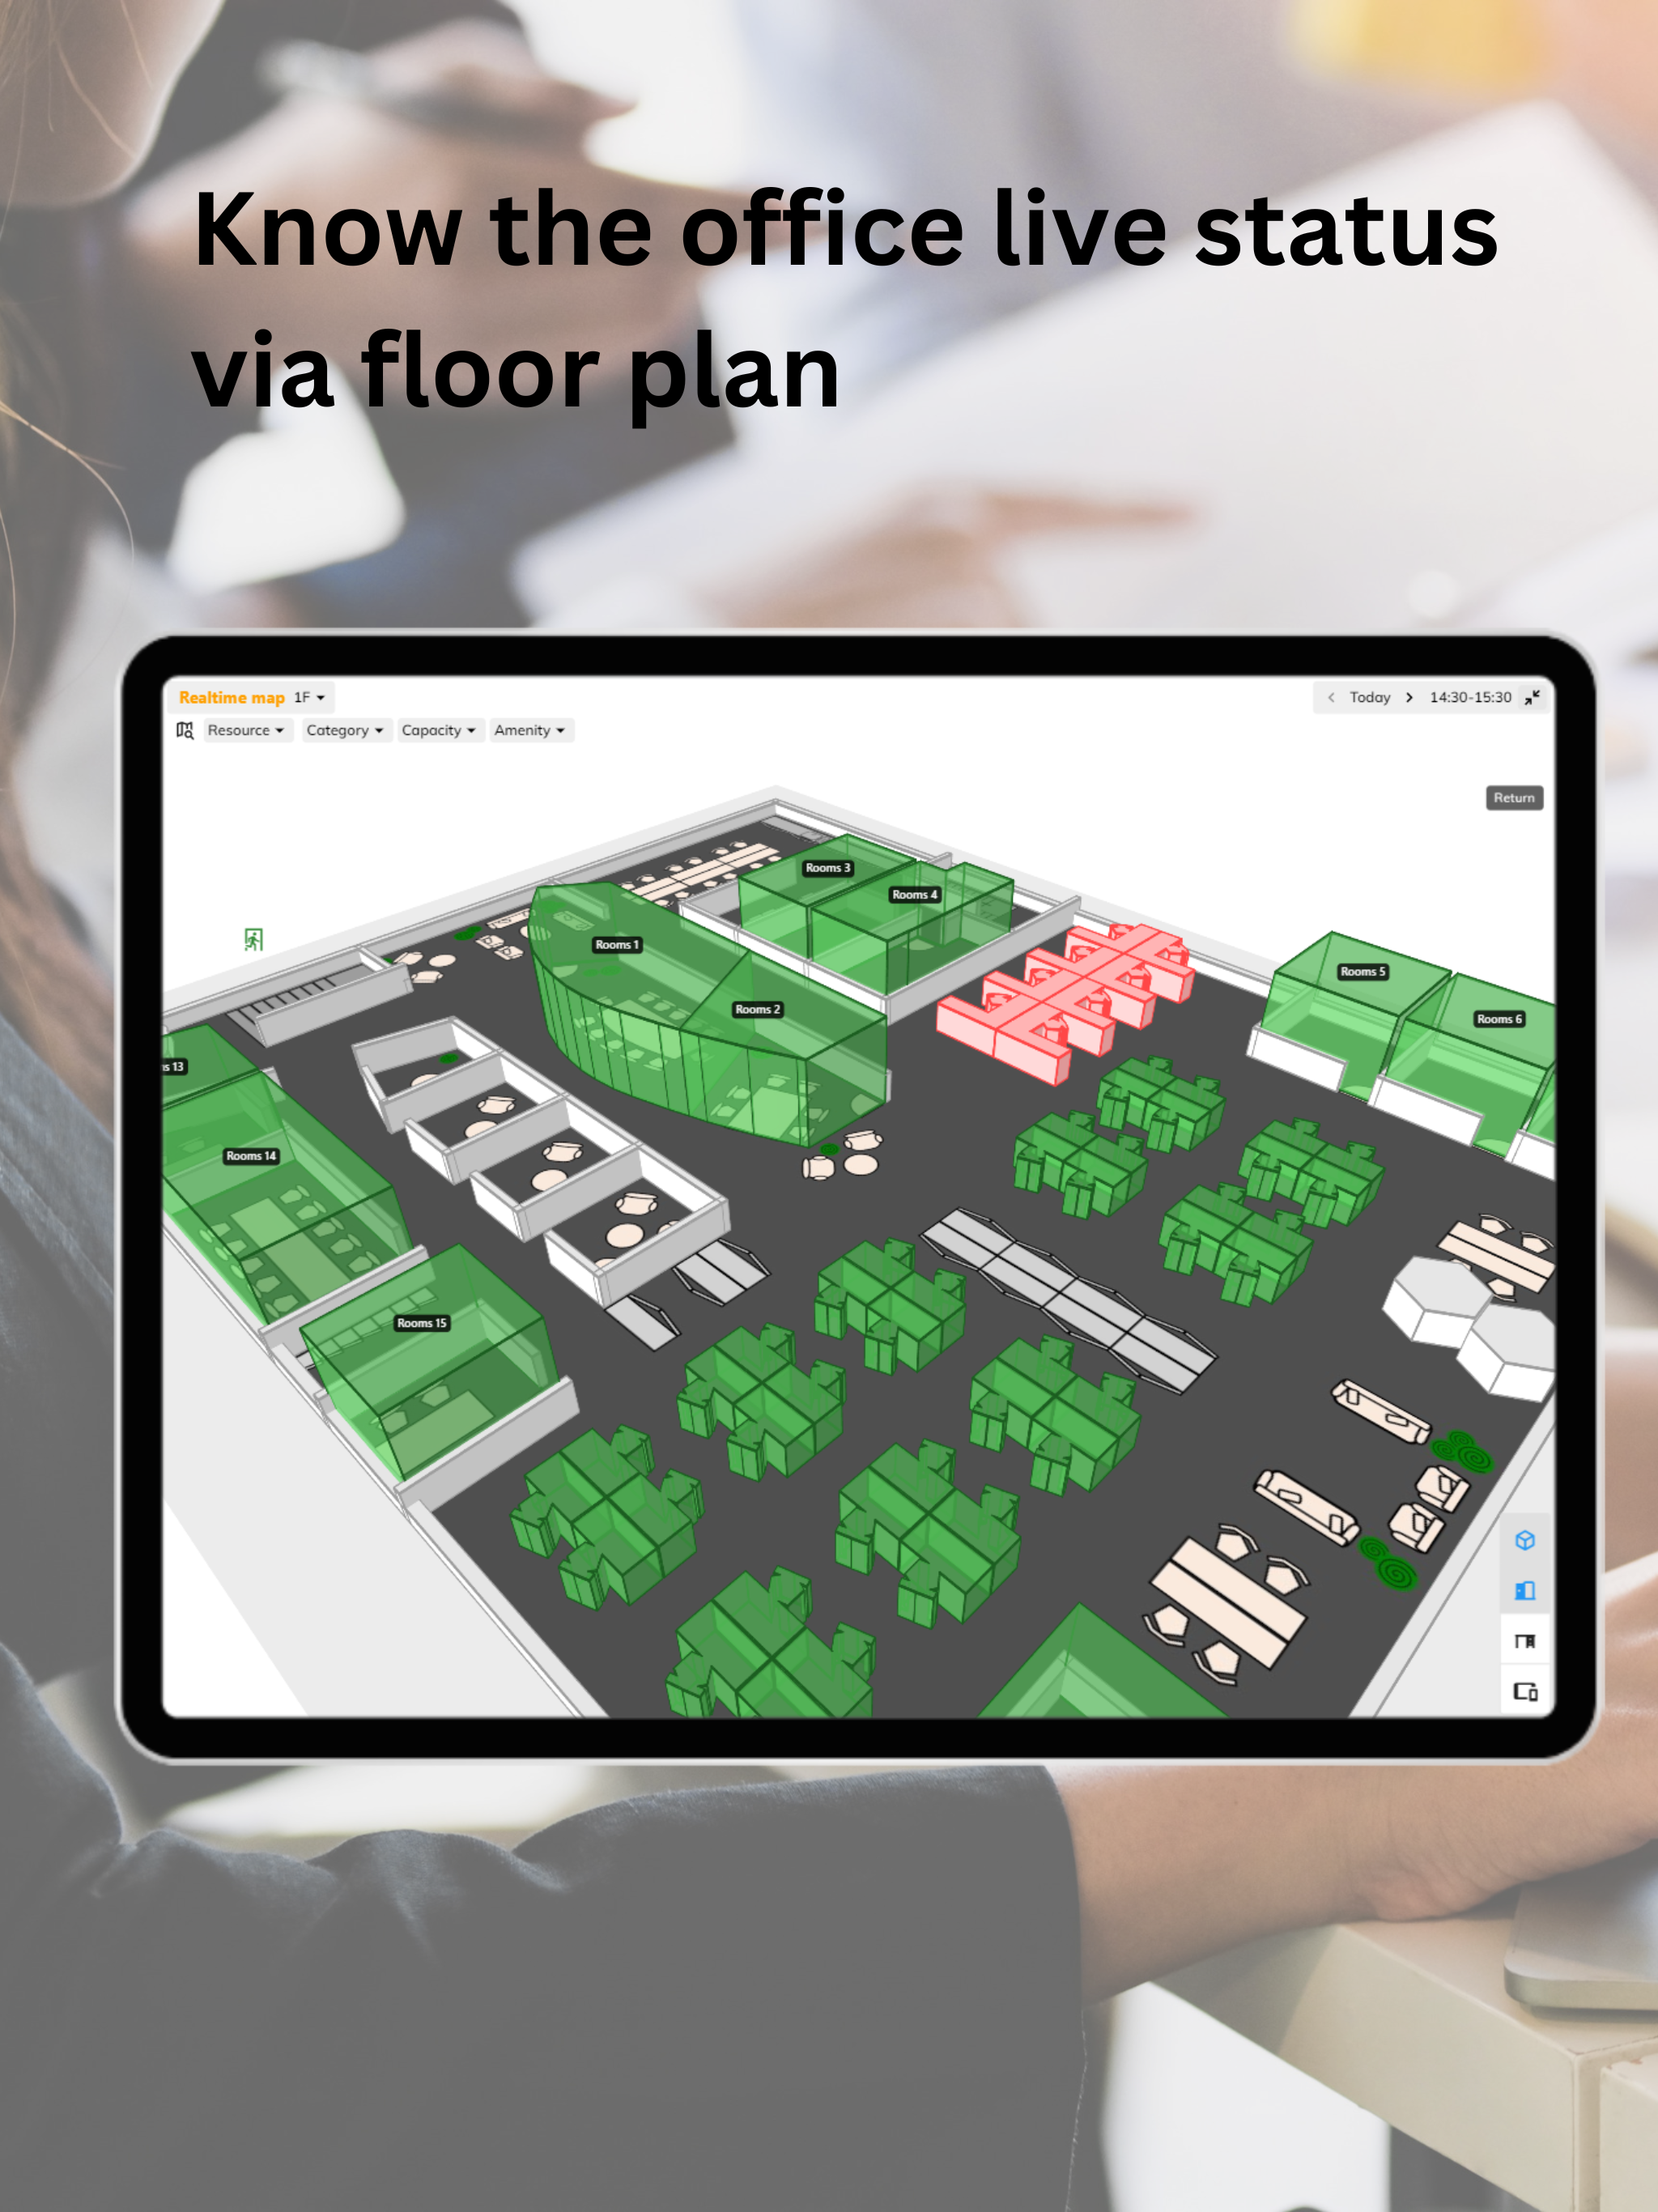 Offision Know the office live status via floor plan